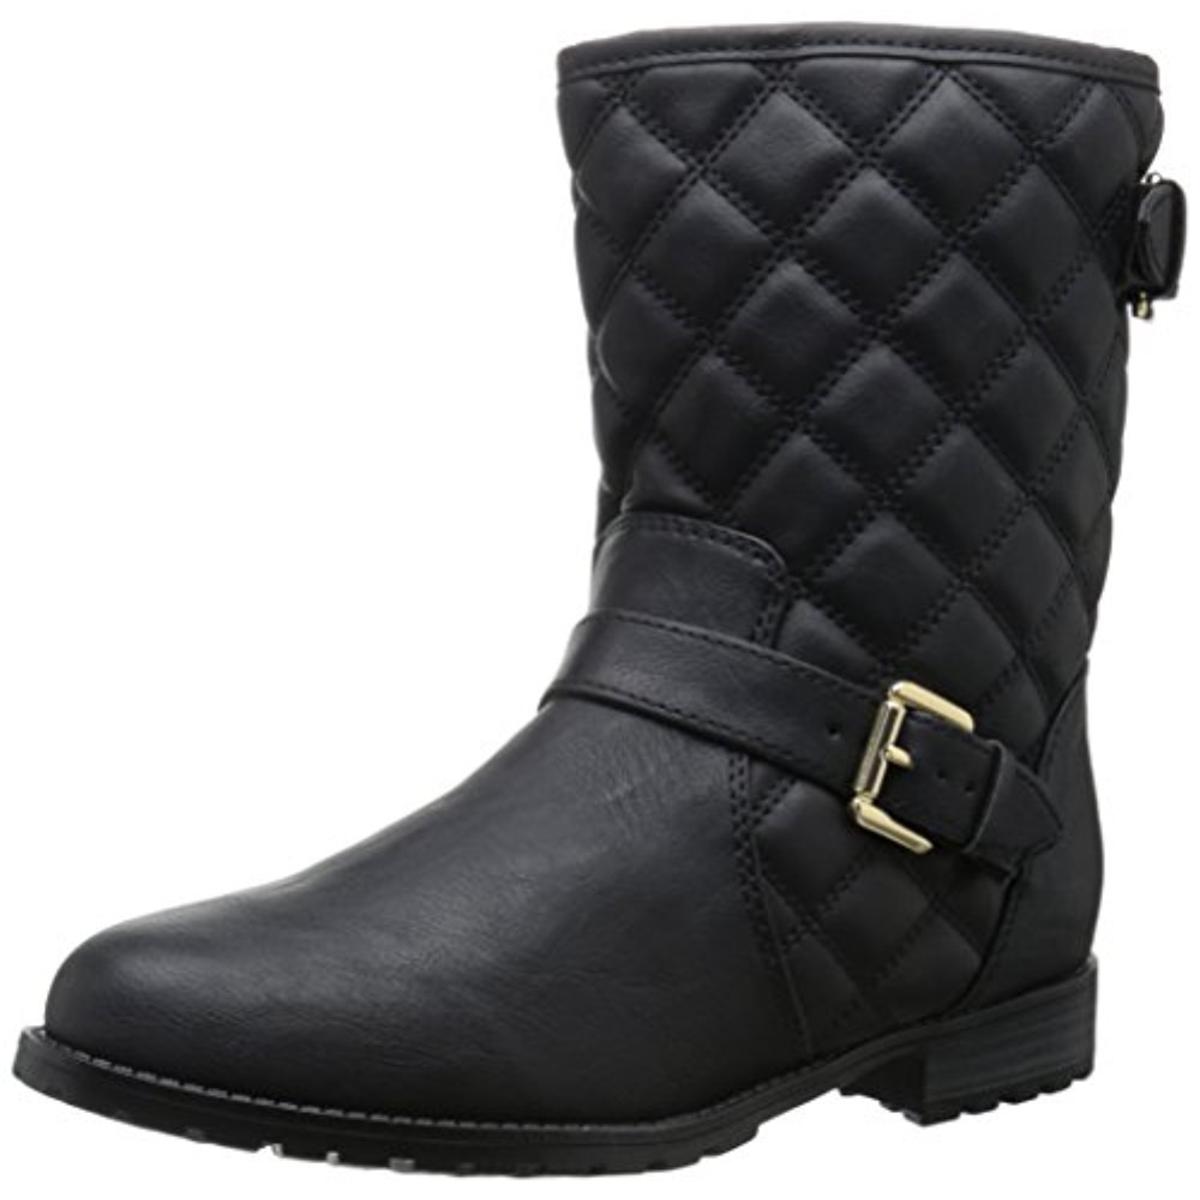 Sporto 7578 Womens Judy Faux Leather Quilted Ankle Winter Boots Shoes ...